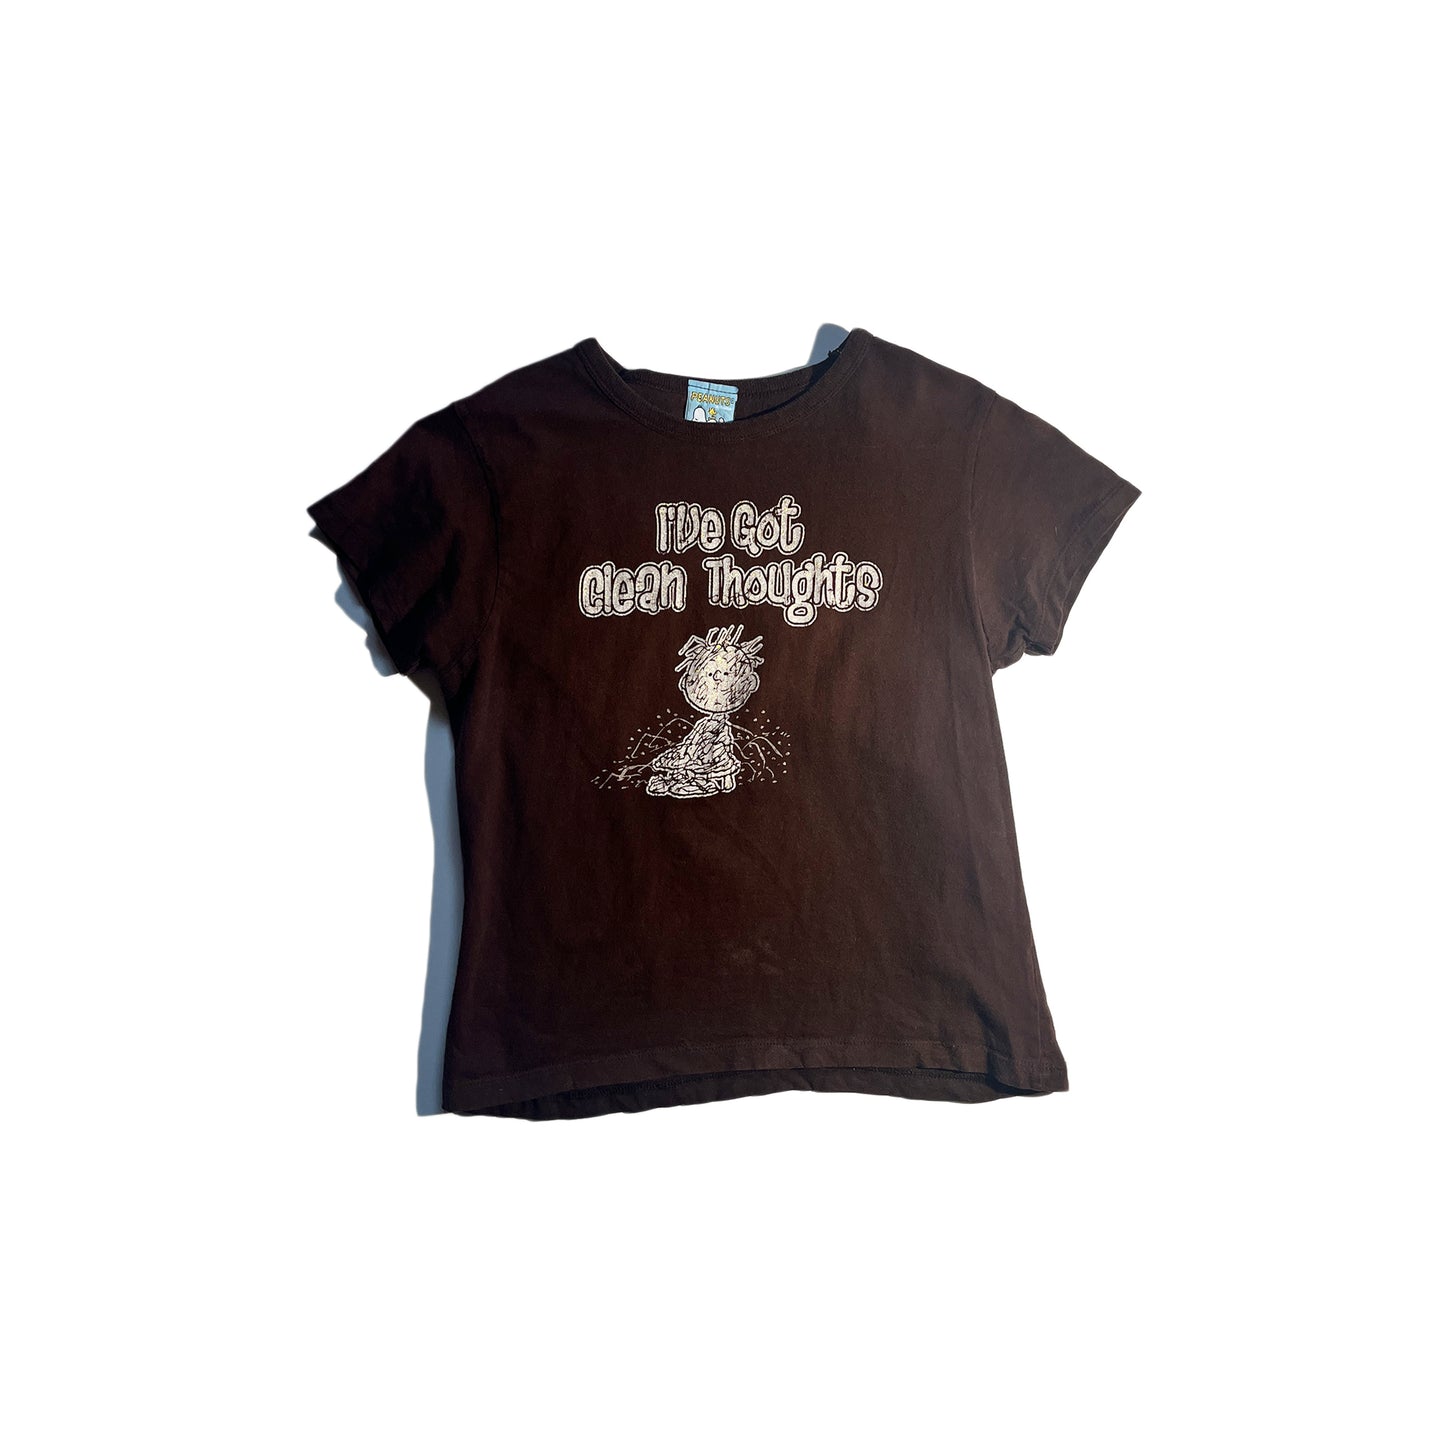 Vintage Peanuts T-Shirt I've Got Clean Thoughts Slogan Baby Tee